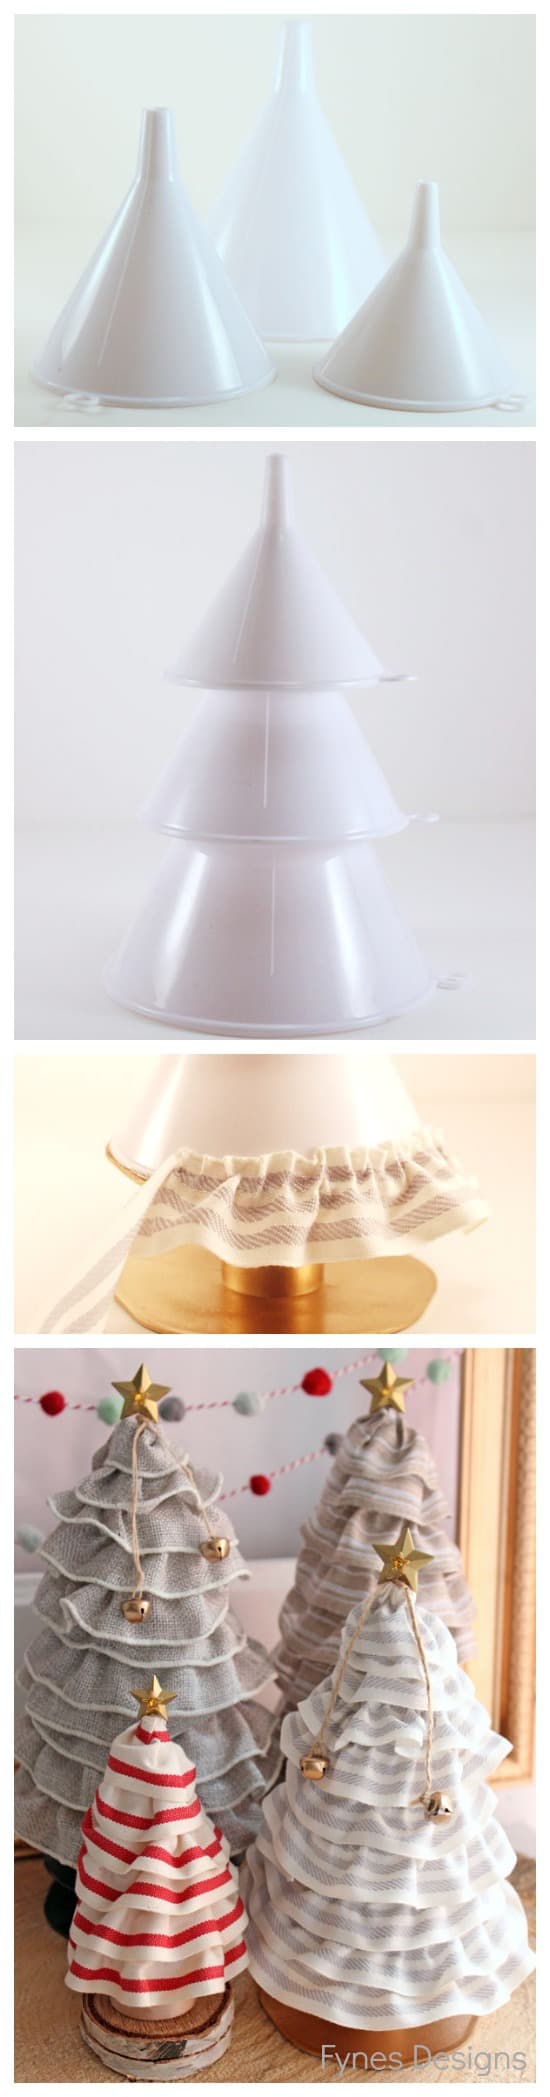 DIY Christmas Tree cones for ONLY 99¢. No more pricy styrofoam! from fynesdesigns.com